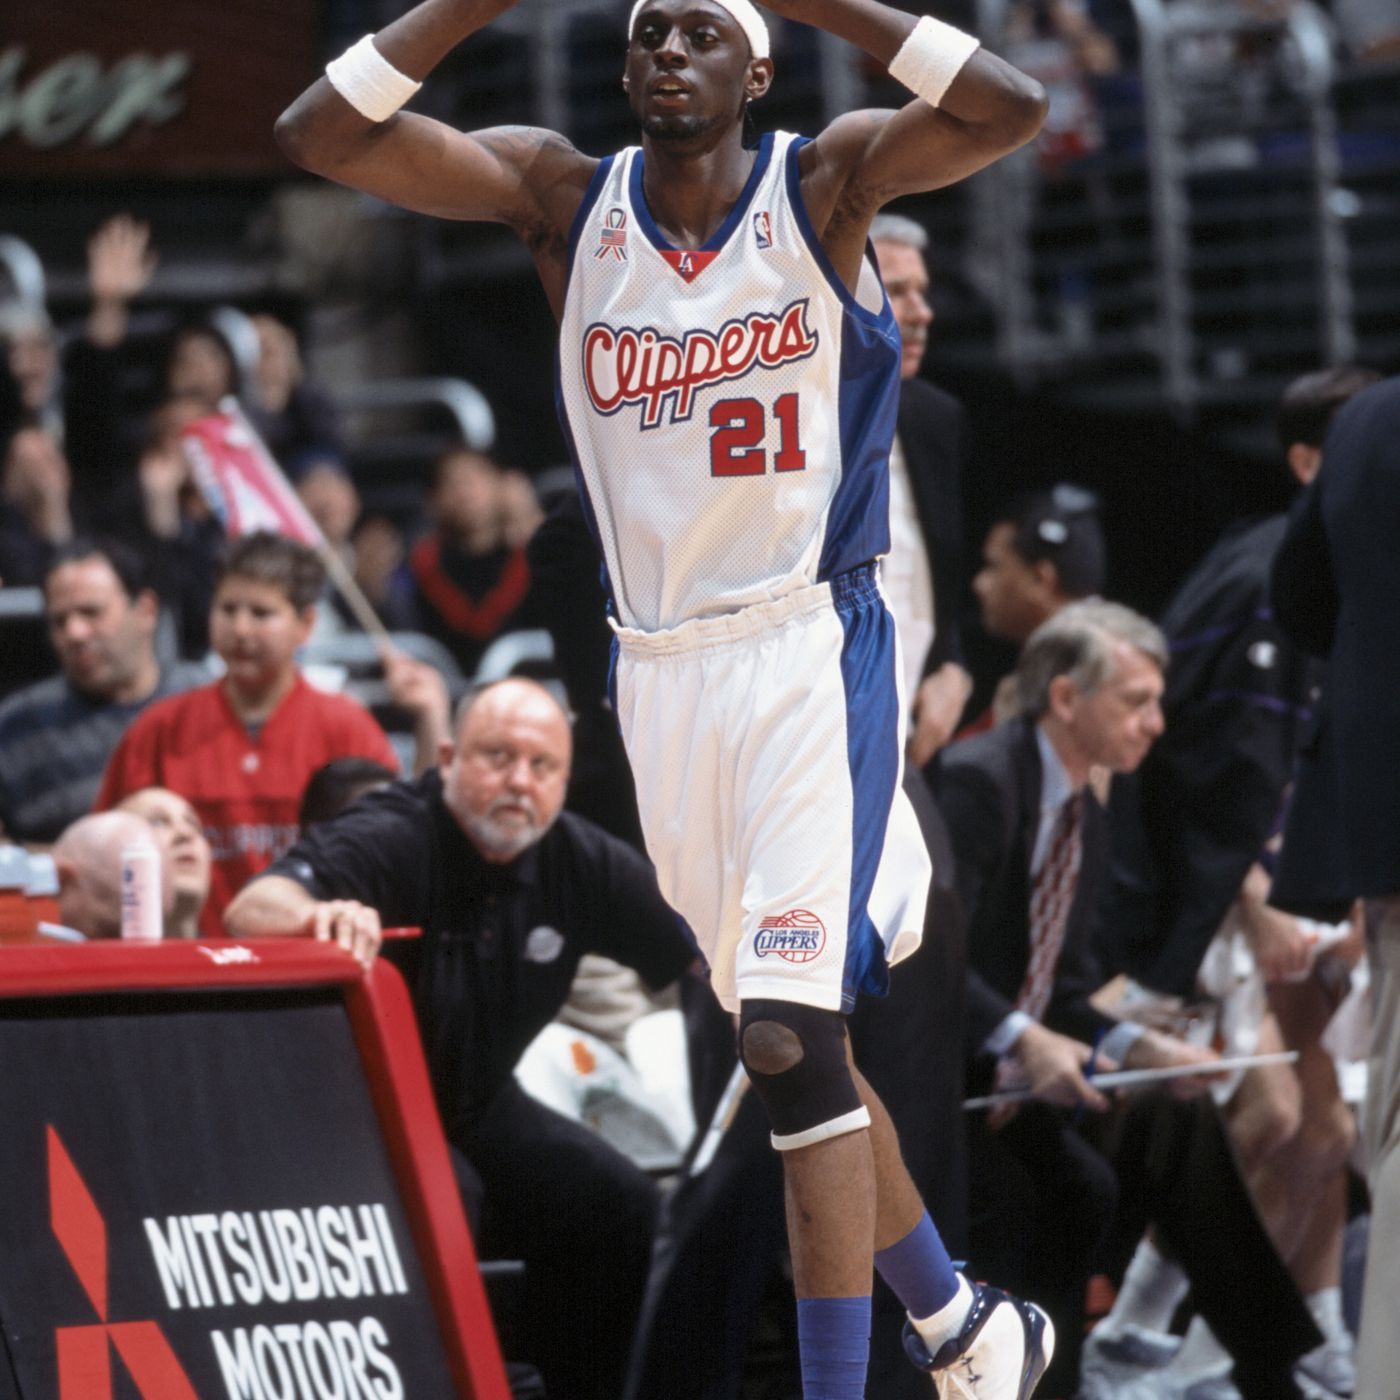 Darius Miles and Quentin Richardson explain their trademark celebration in  The Players' Tribune - Clips Nation